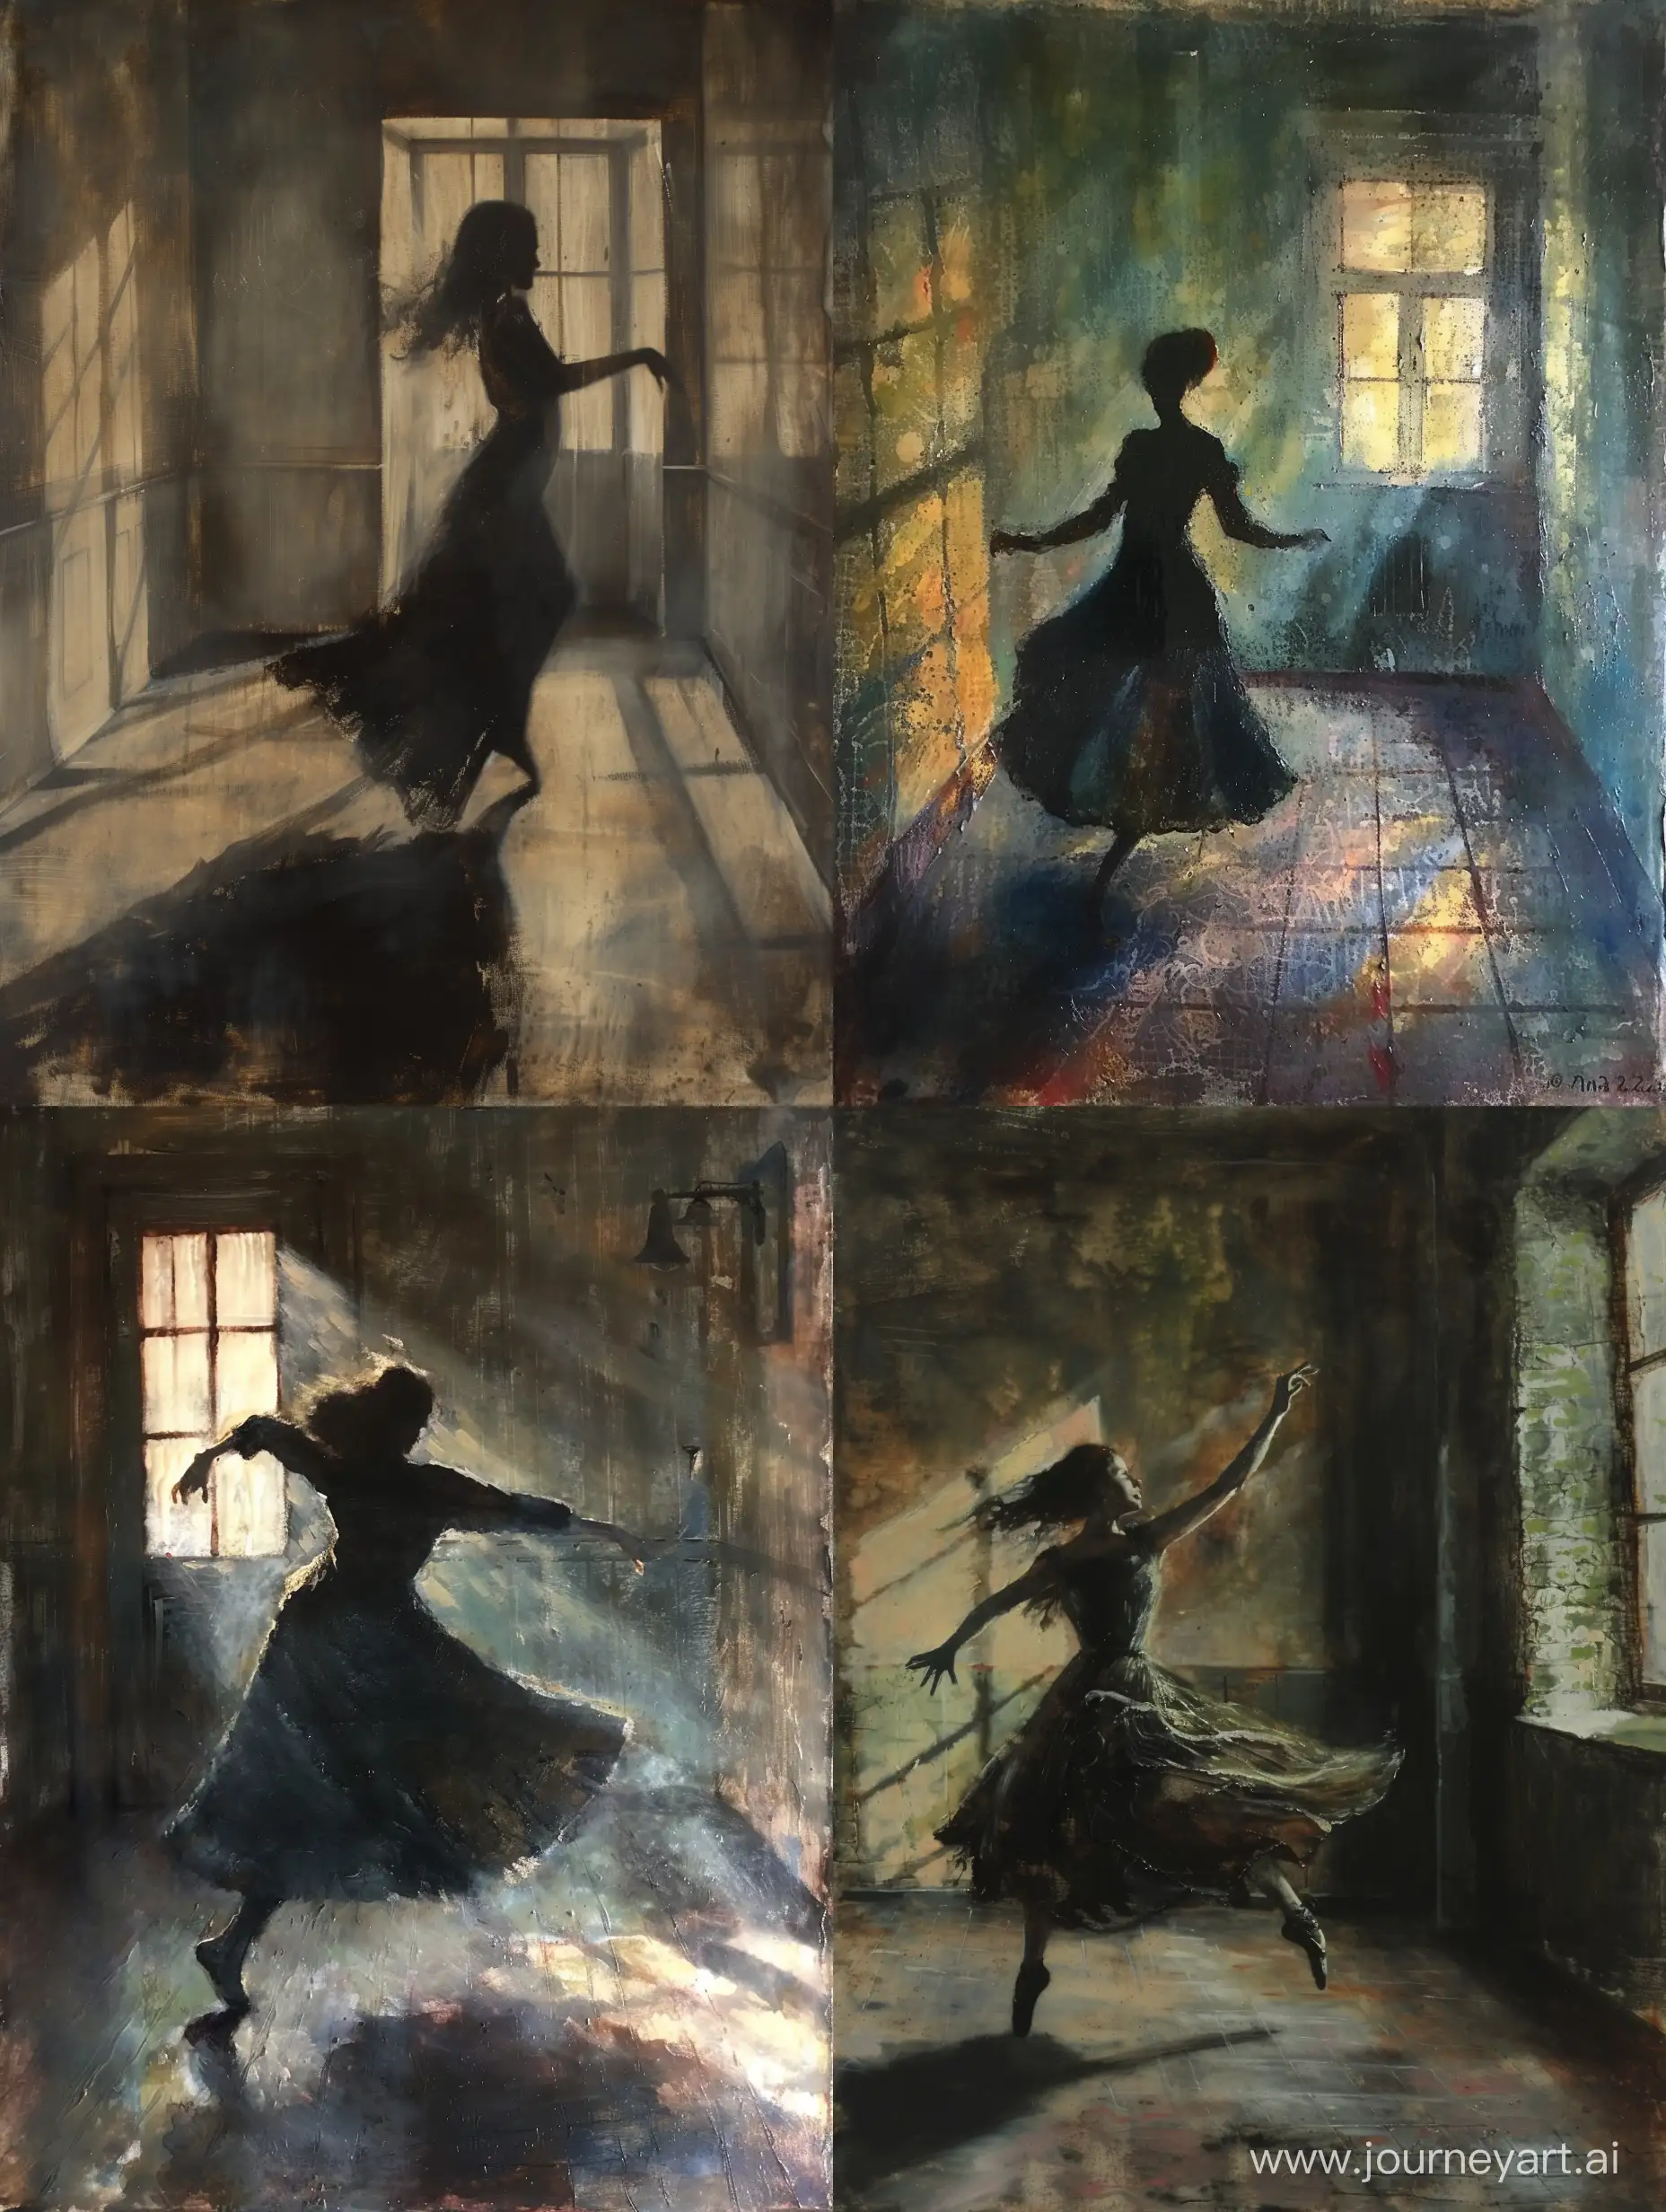 An encaustic of a woman dancing alone in a dimly lit room, her movement fluid and full of emotion, with shadows playing on the walls, by Anna Razumovskaya in Claude Monet's color palette